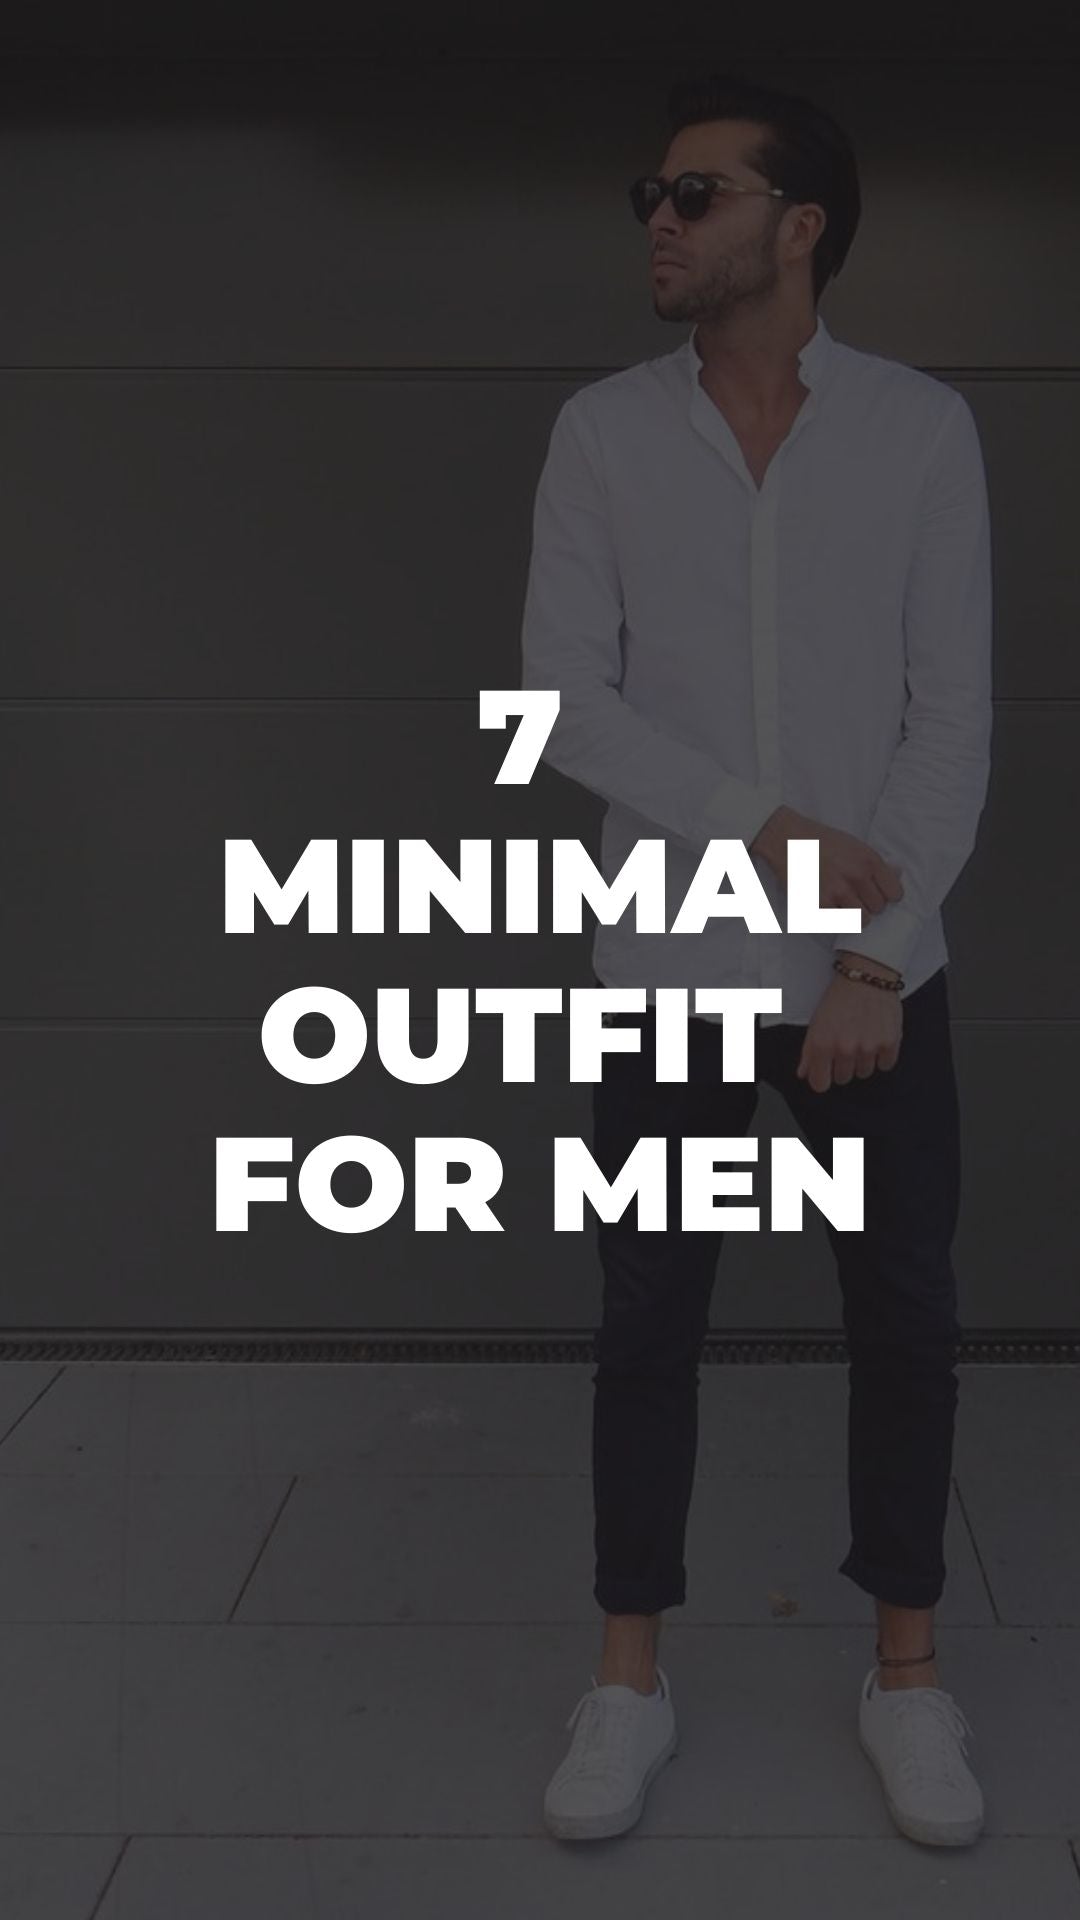 7 Minimal Outfit For Men